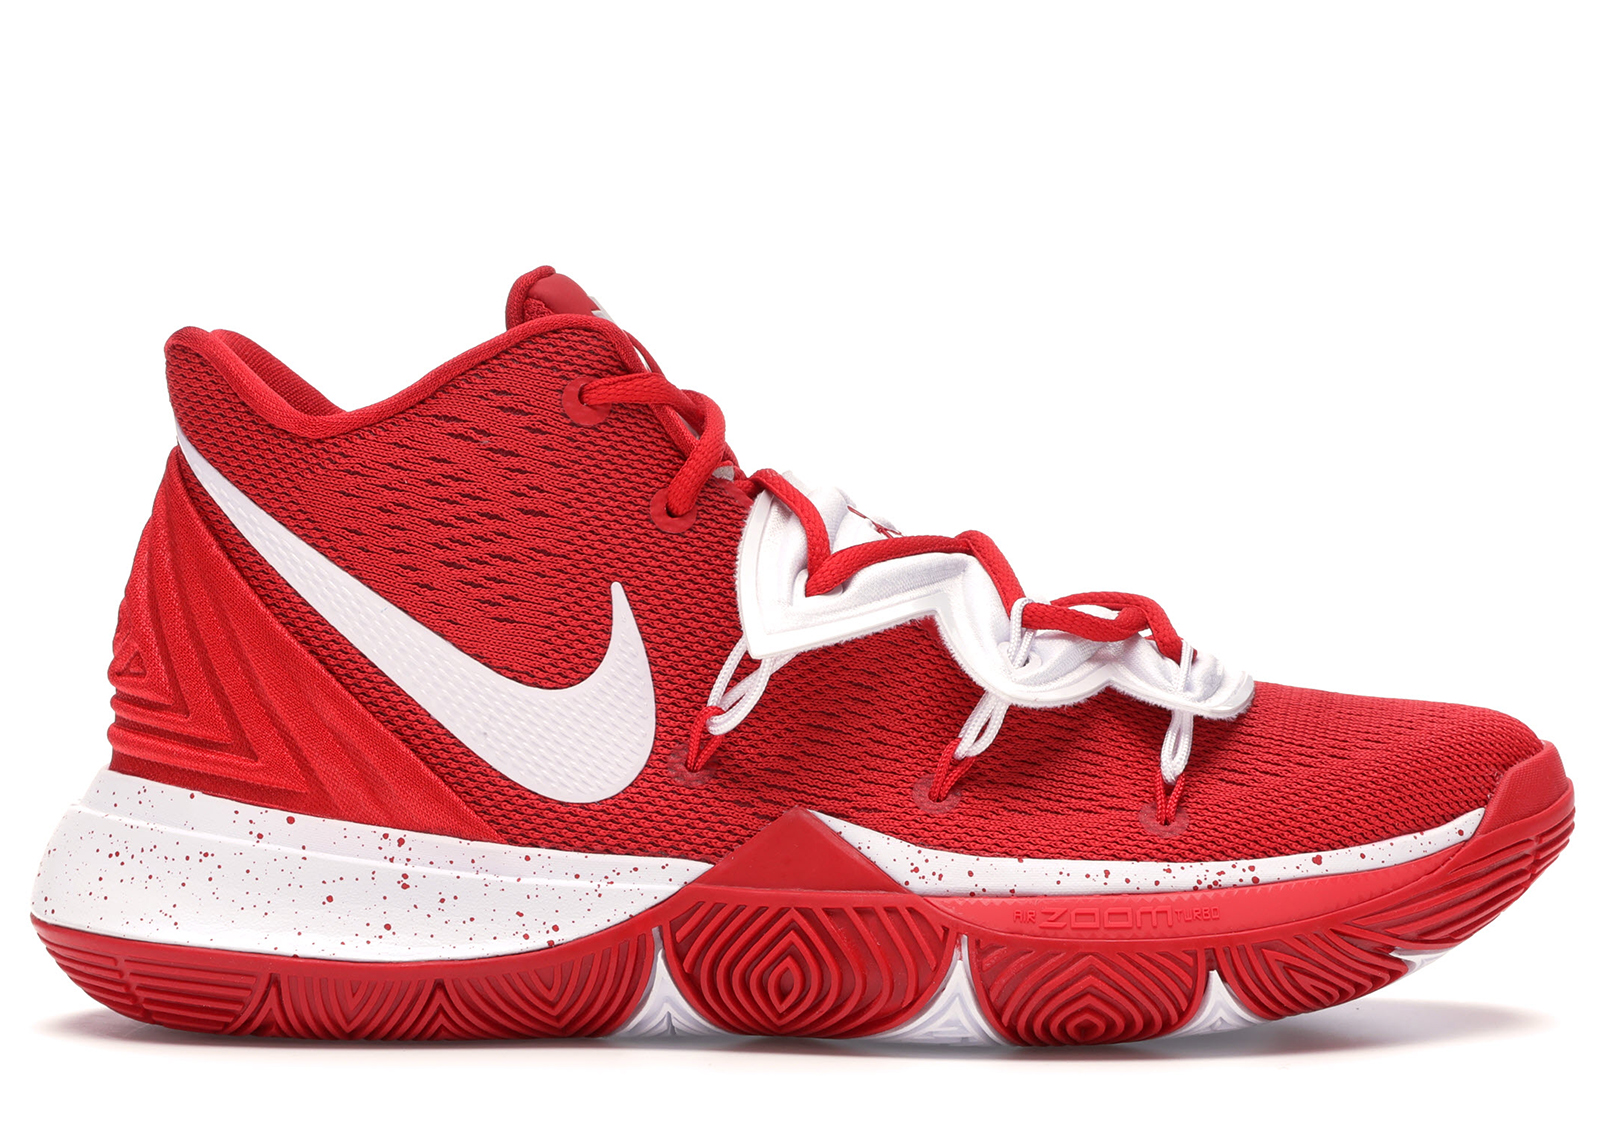 kyrie 5 university red and black